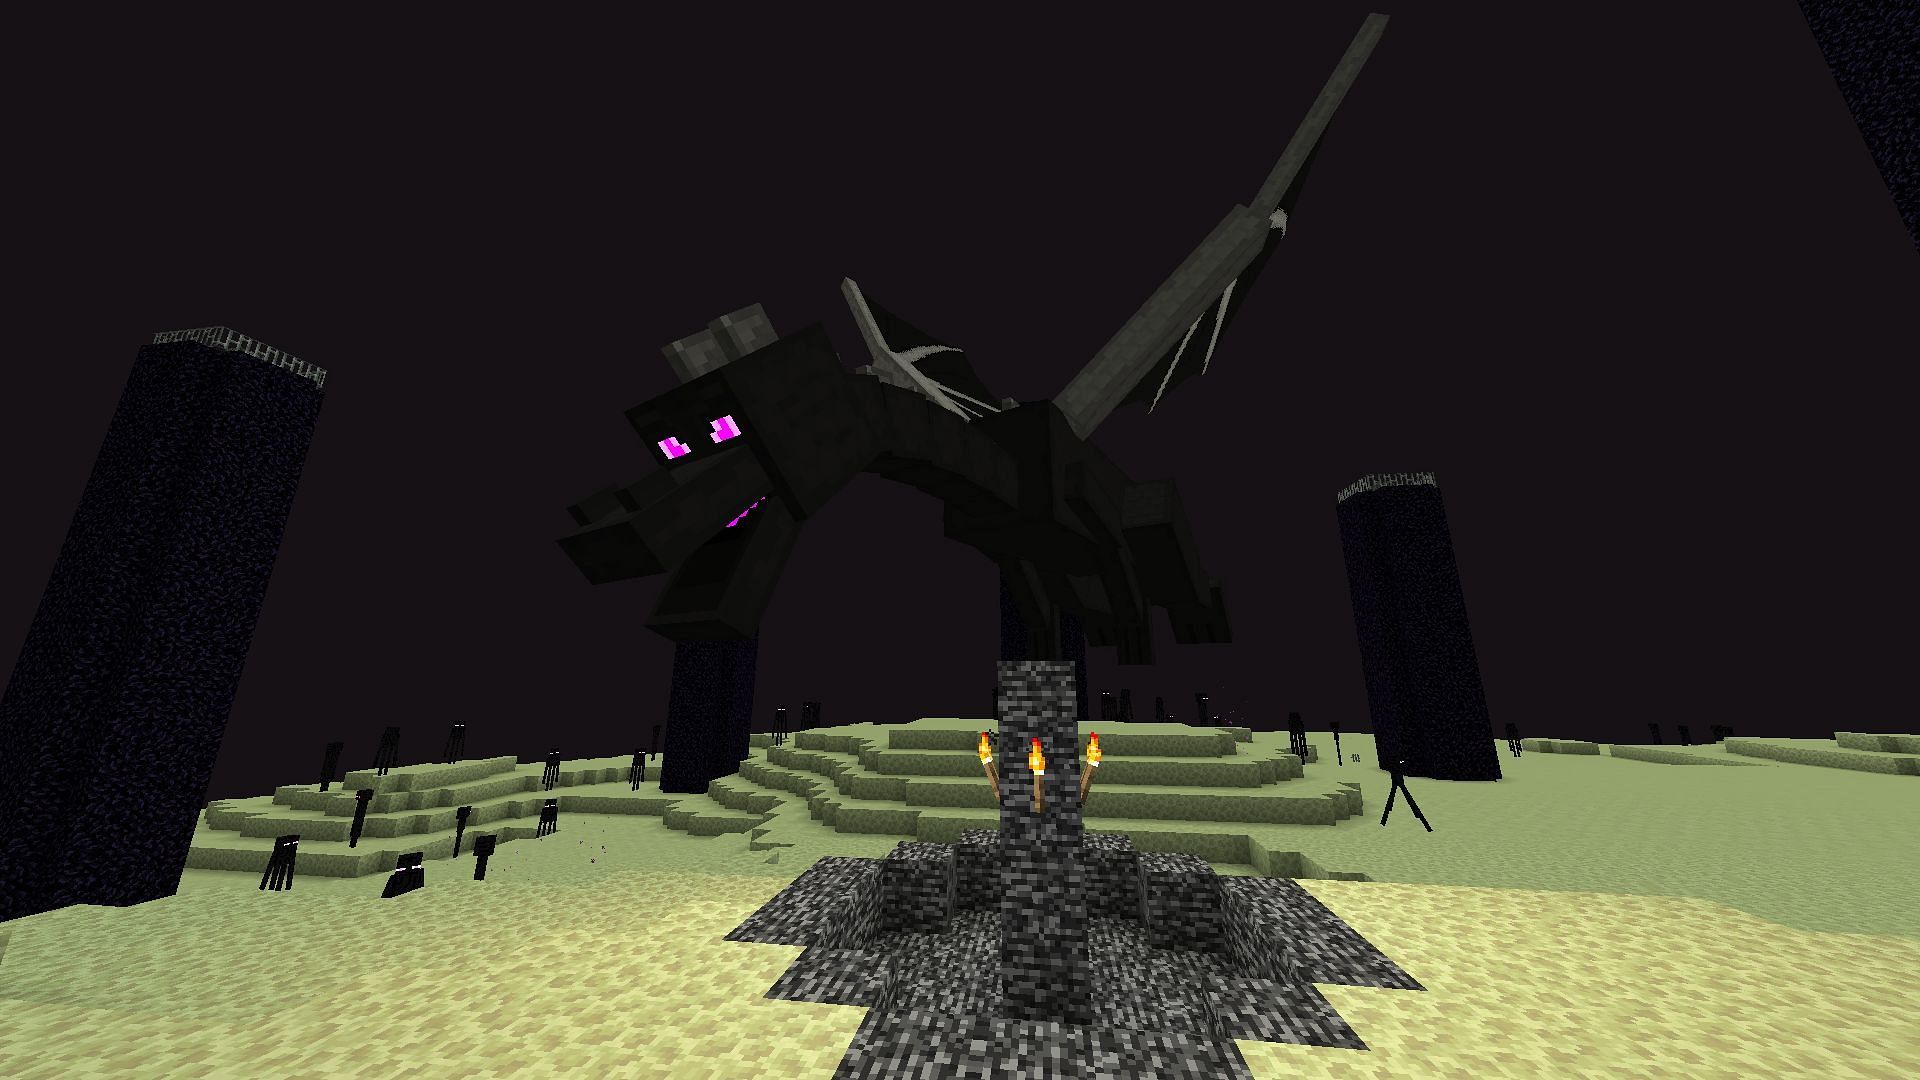 Players can defeat the Ender Dragon with their friends in the game (Image via Mojang)